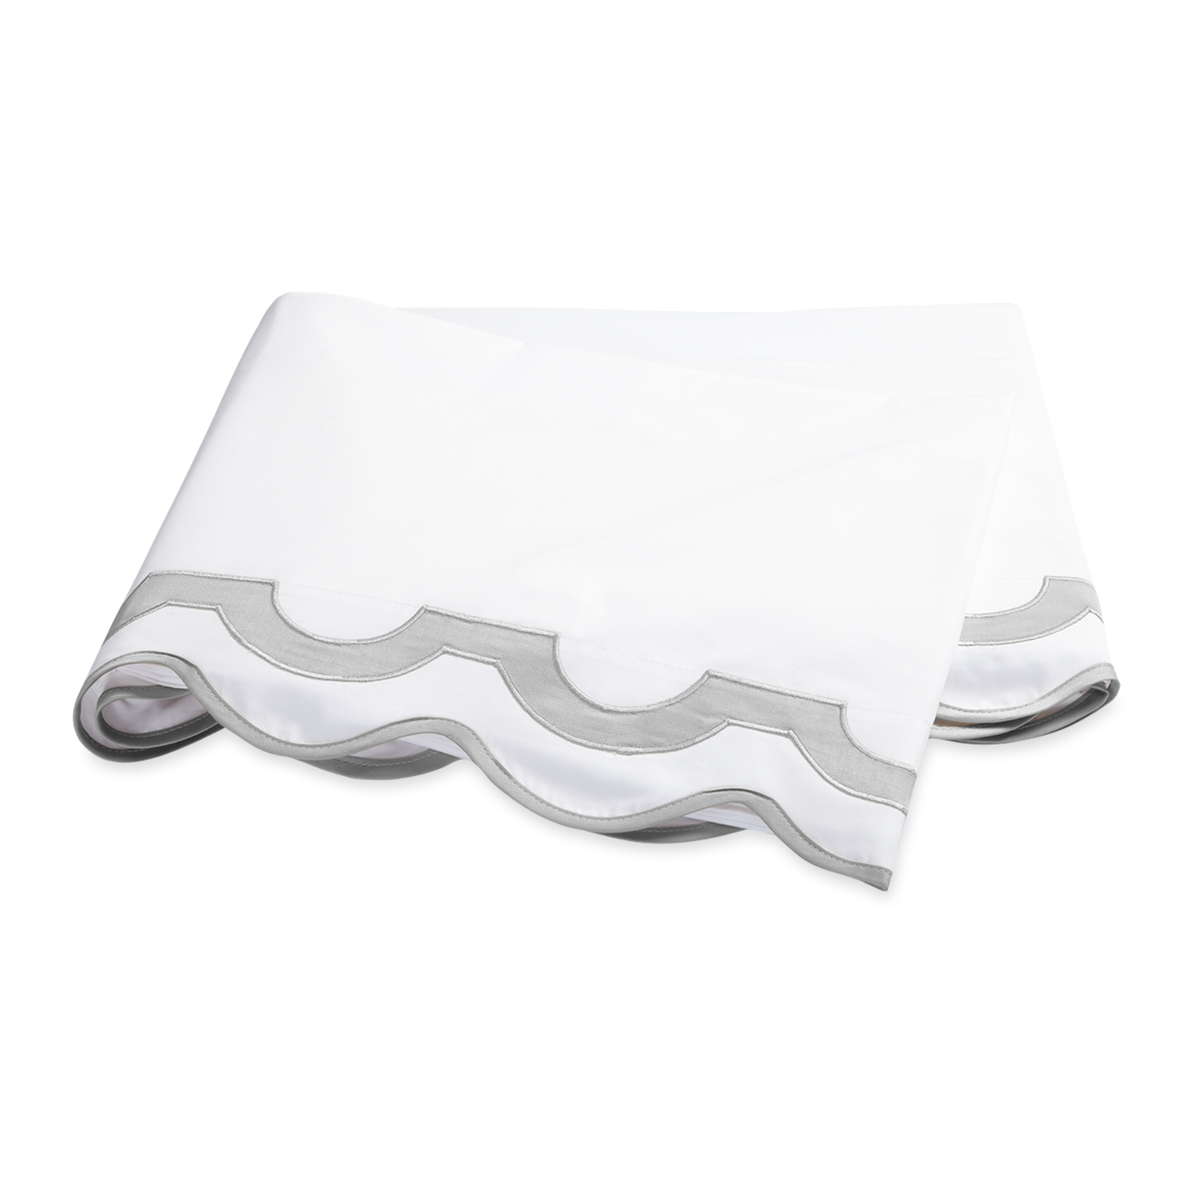 Folded Flat Sheet of Matouk Mirasol Collection in Silver Color